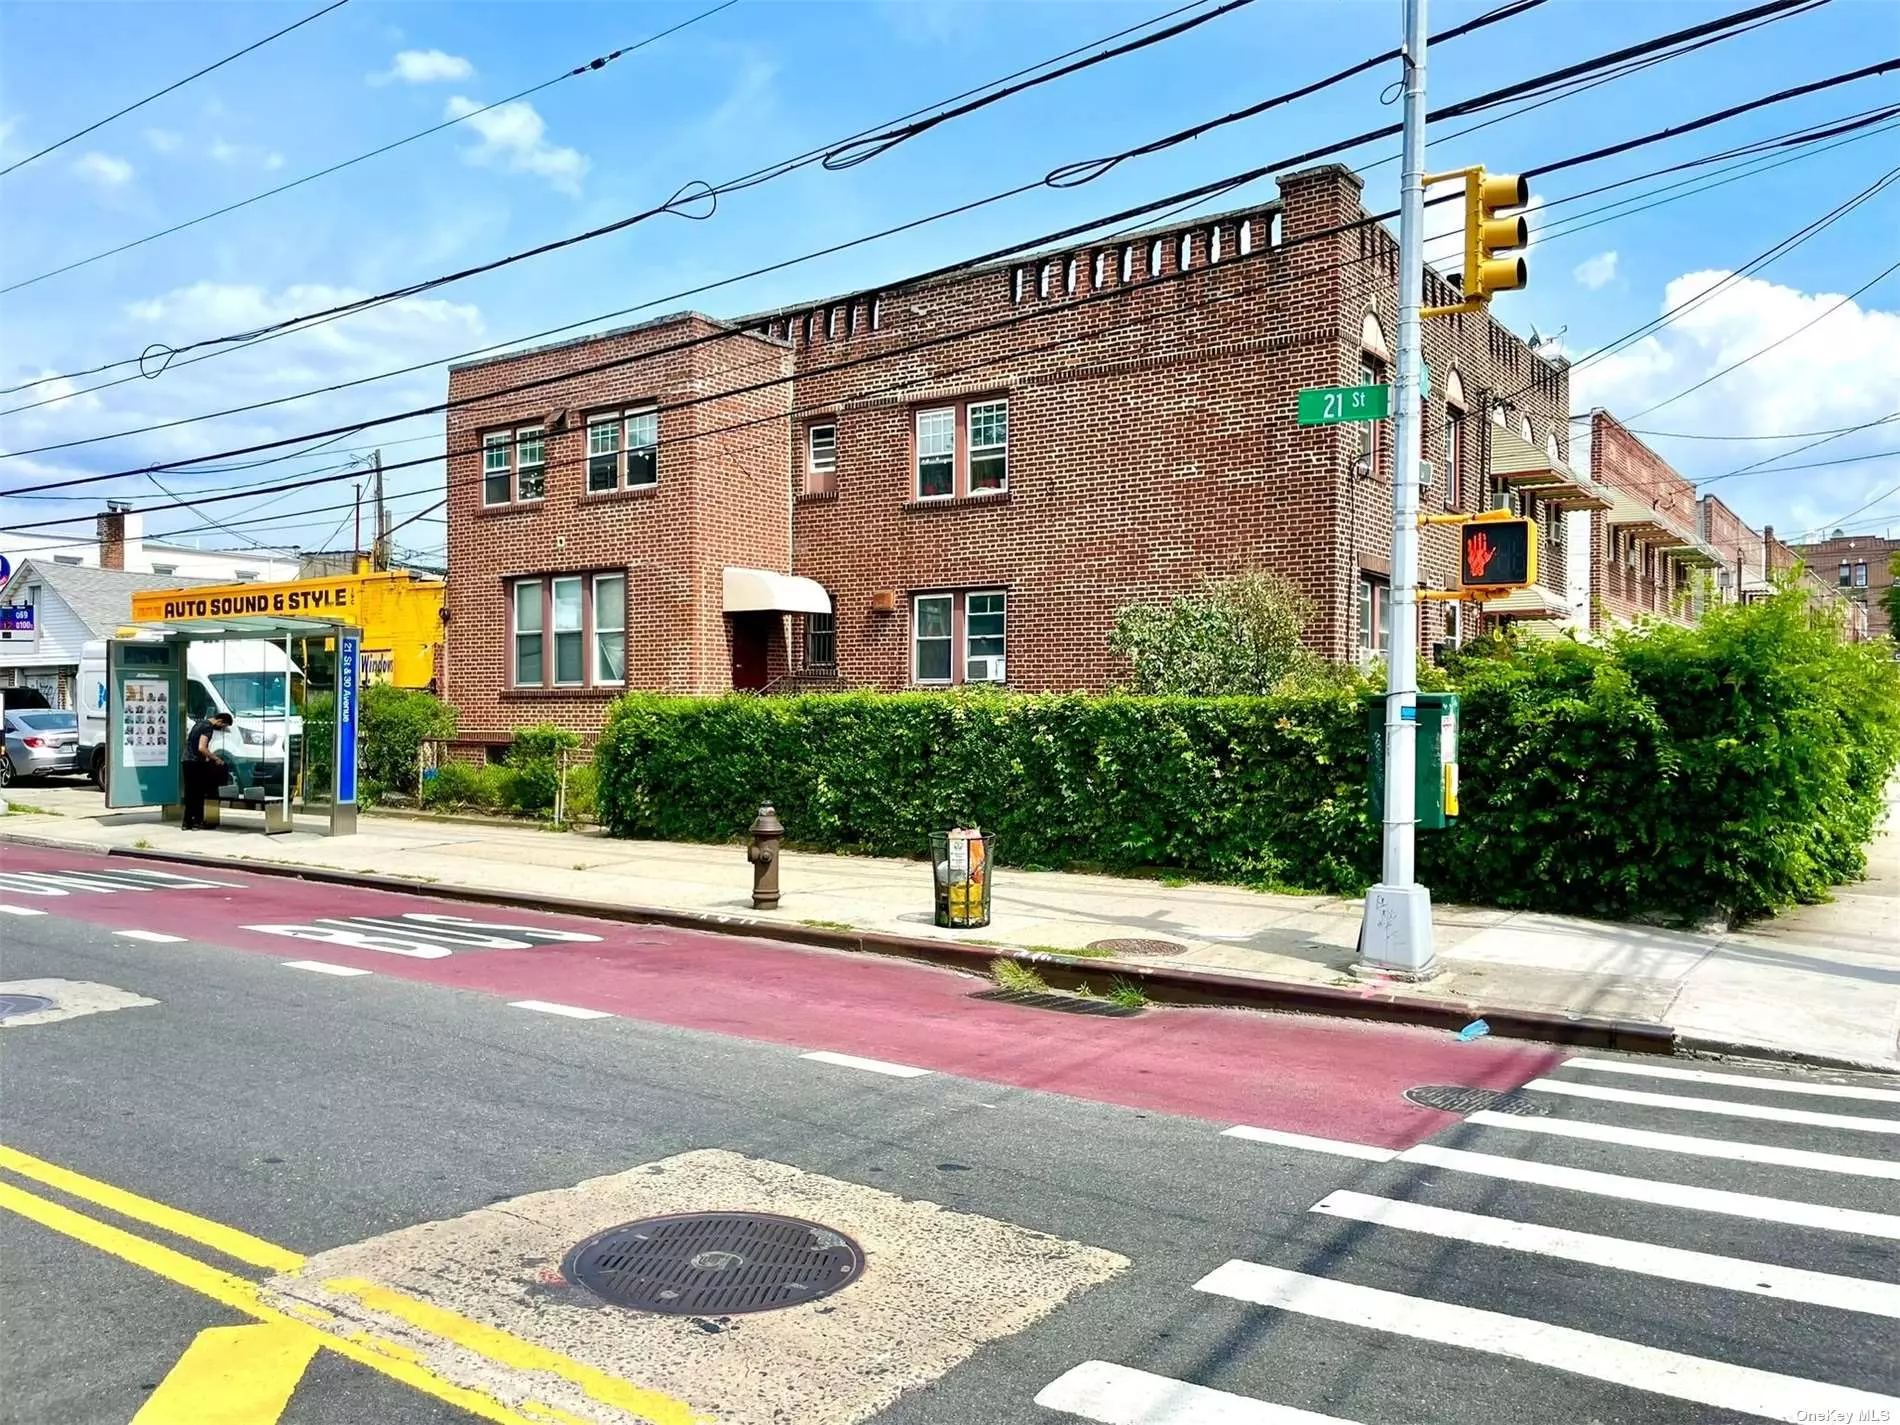 Introducing an excellent brick corner building located at the highly sought-after border of Long Island City and Astoria with an annual gross income of $108, 600. This presents a great investment opportunity with space for 3 families plus a storefront. The interior has been expanded to a generous 3, 000 square feet of living space and a brand new roof was installed just two years ago. Situated within the highly desirable R5B zoning, it is conveniently located near numerous dining, shopping, and transportation options, including the N/W subway and Q18 & Q102 bus lines. A prime property with great potential!